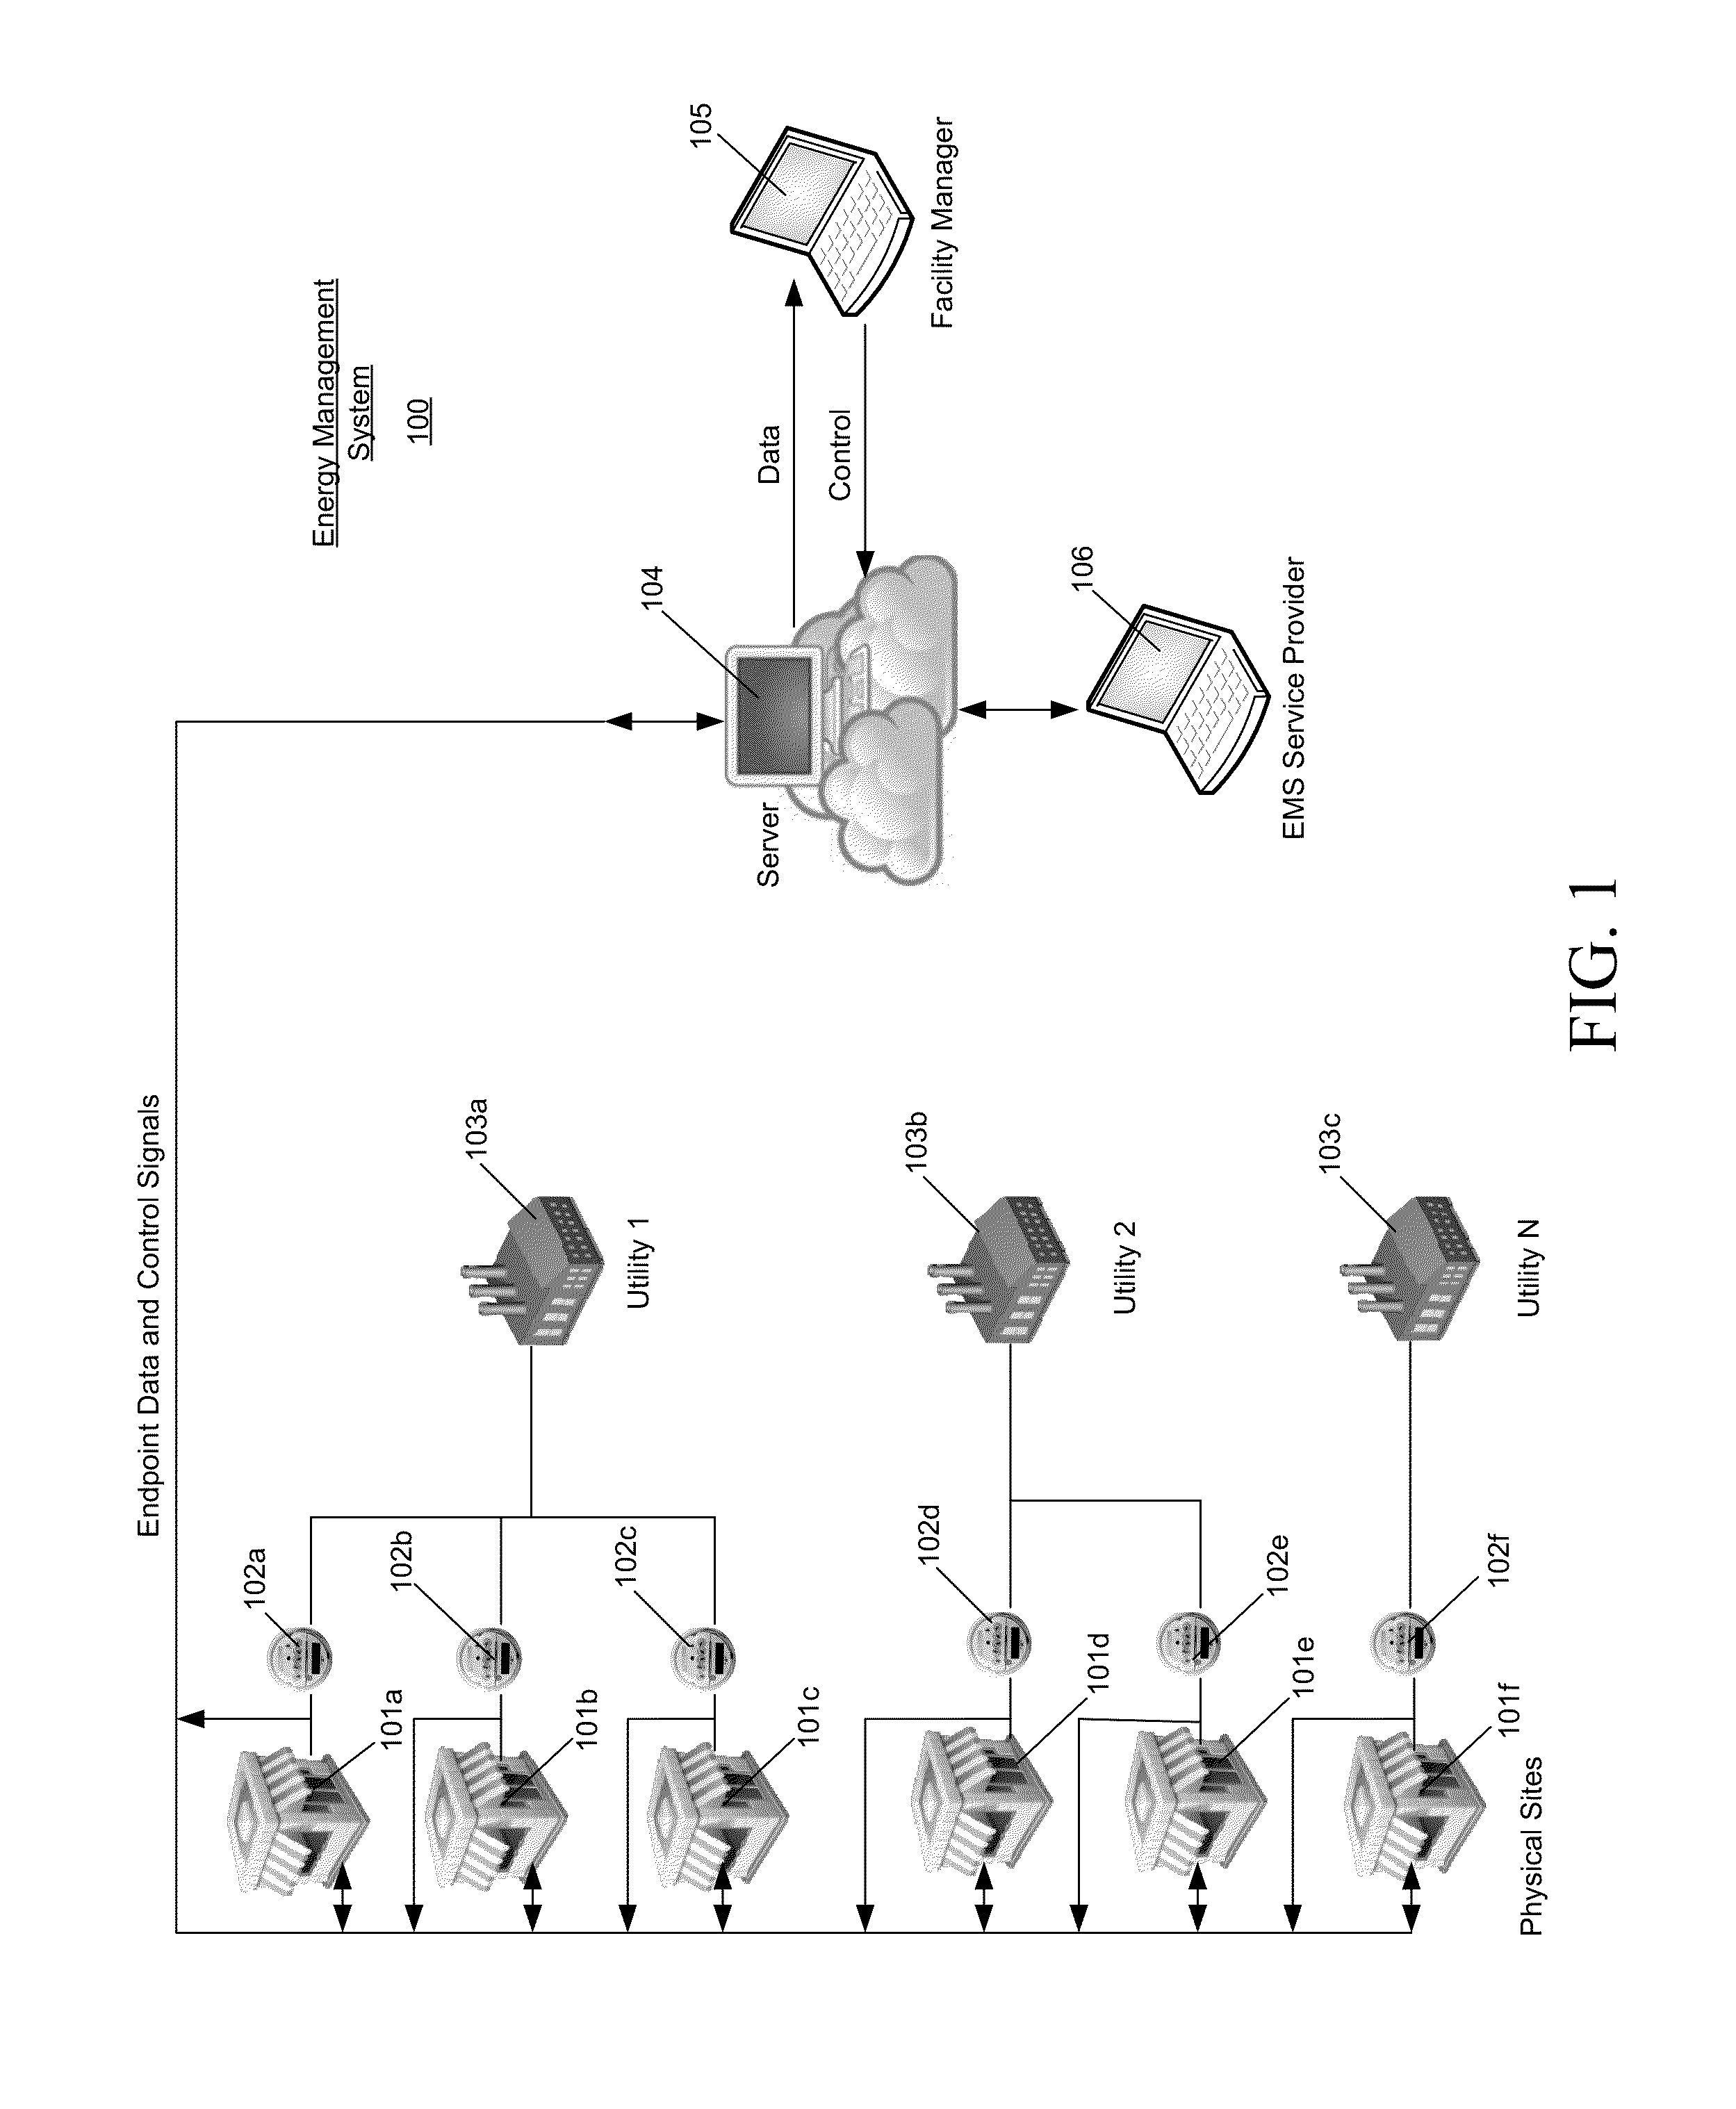 Method and system for tracking project impacts, event impacts, and energy savings